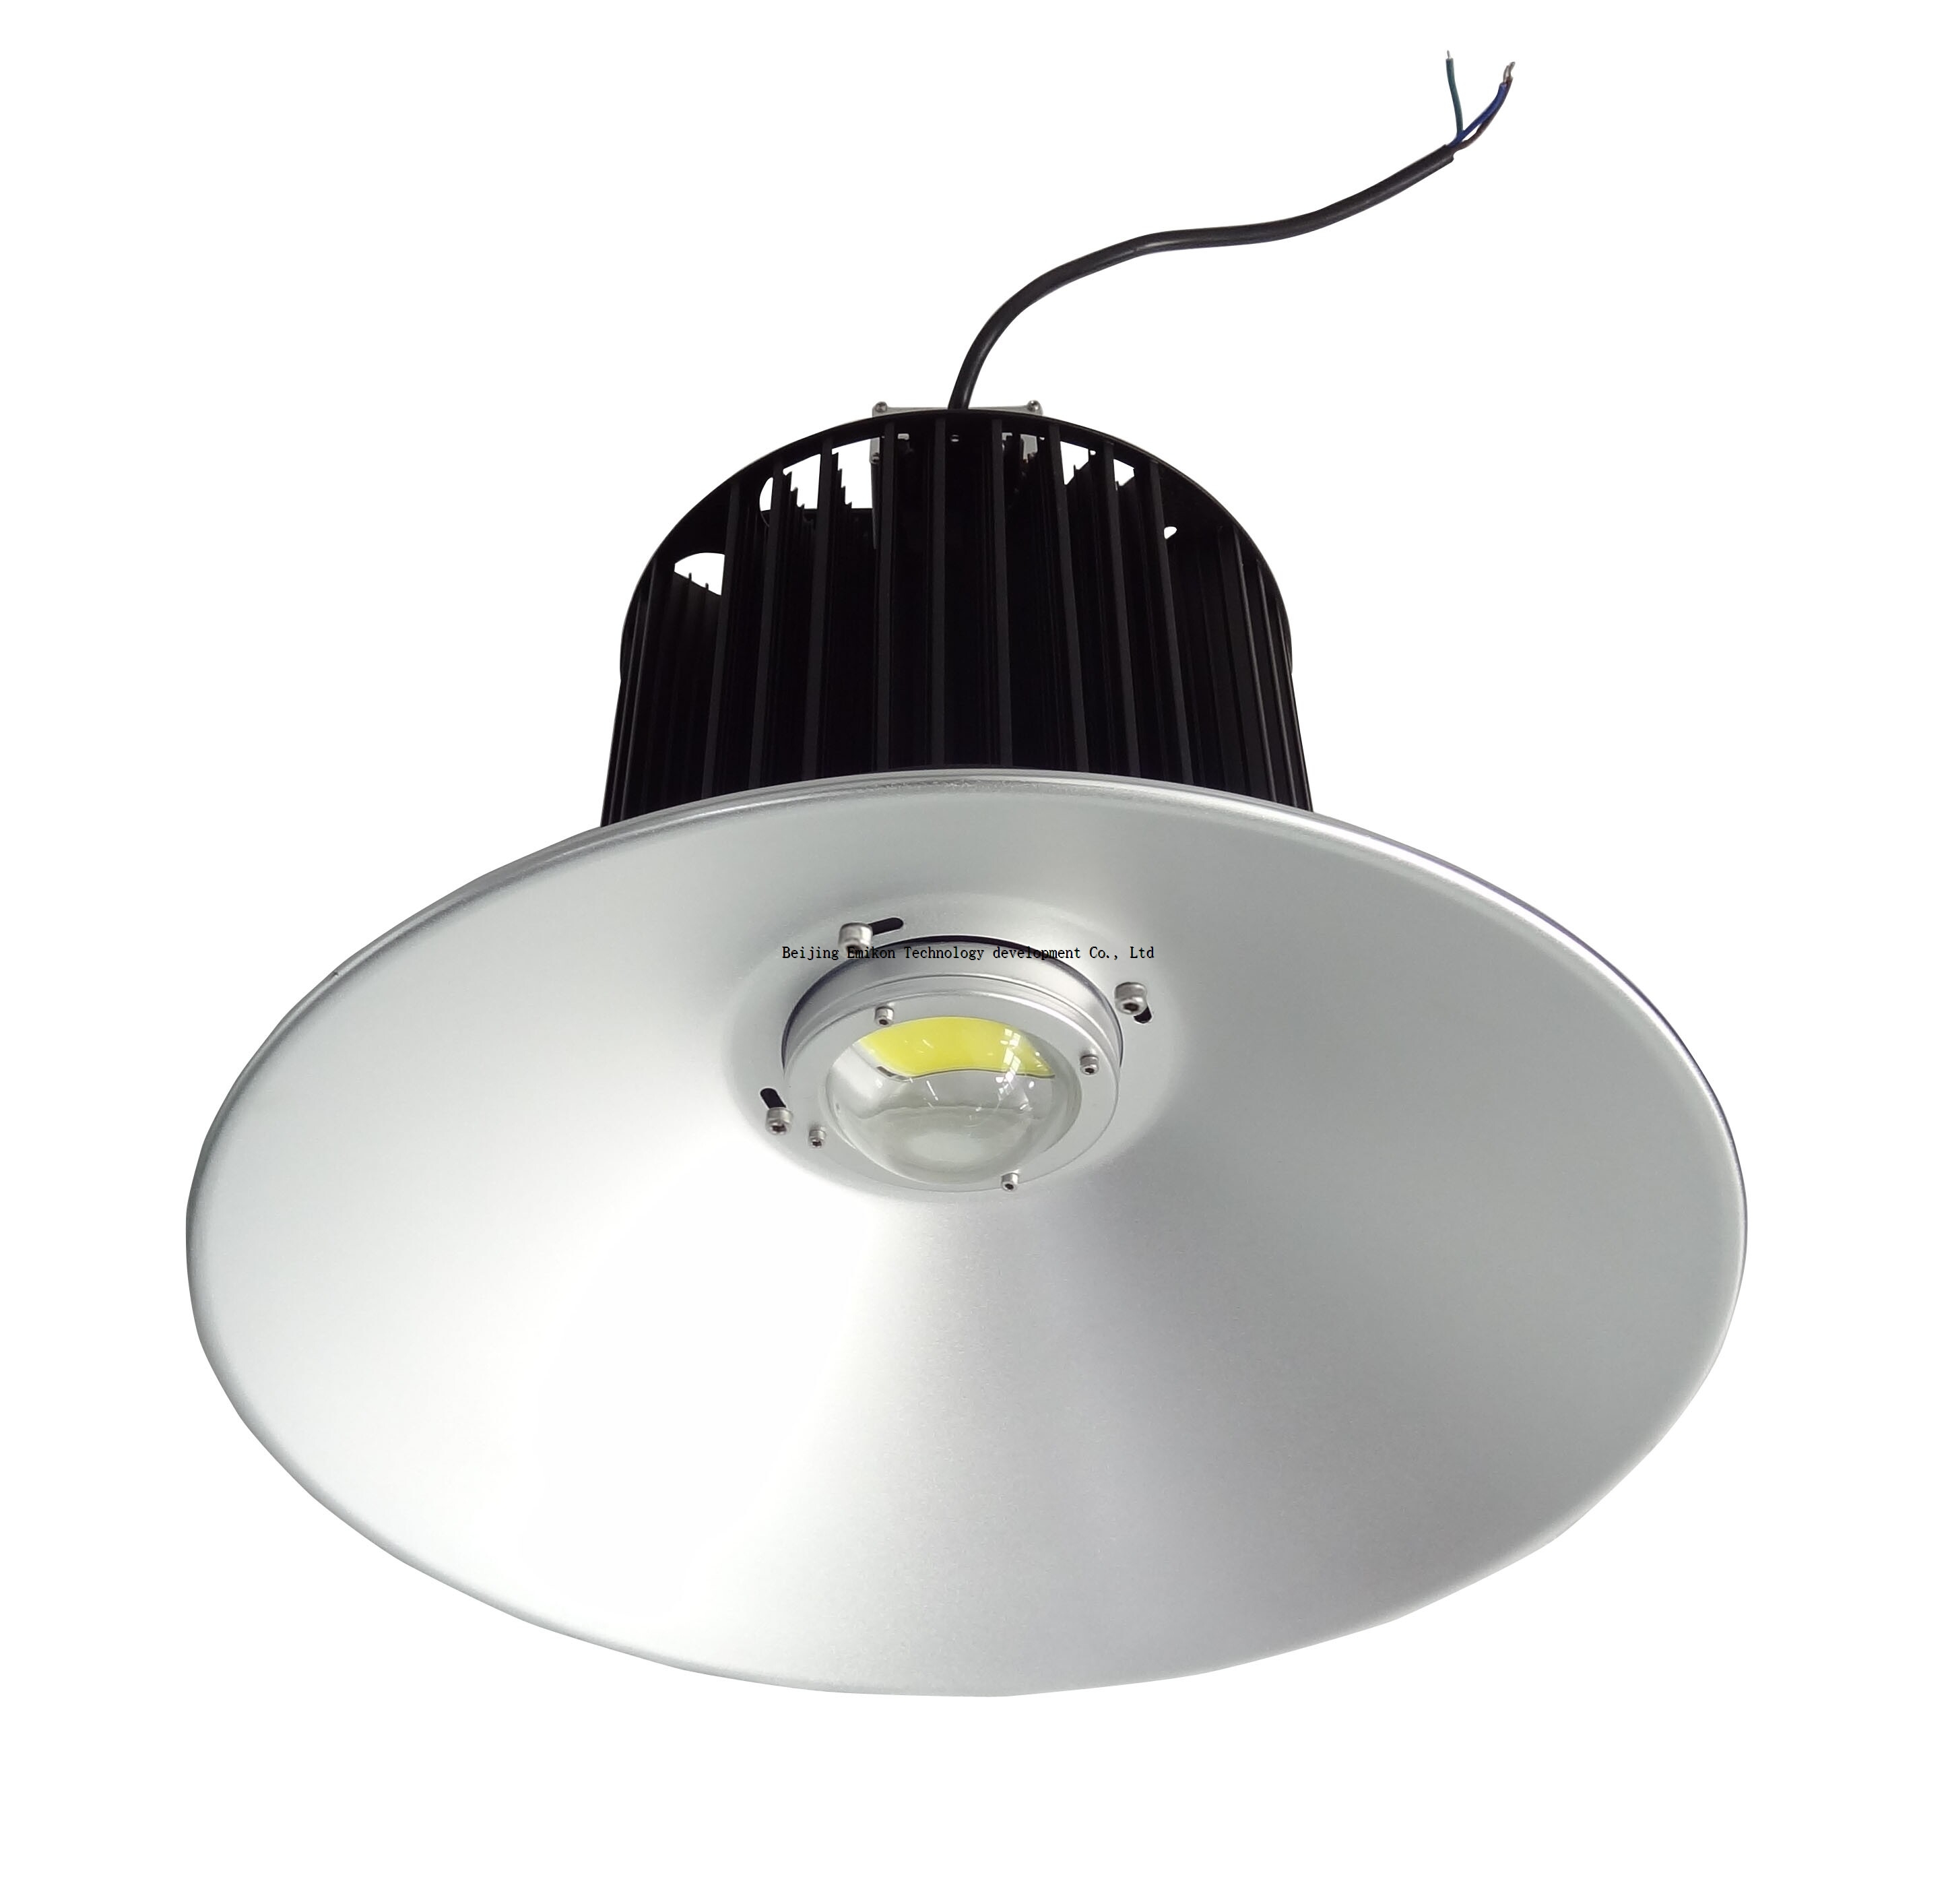 LED high bay light with 100 Power